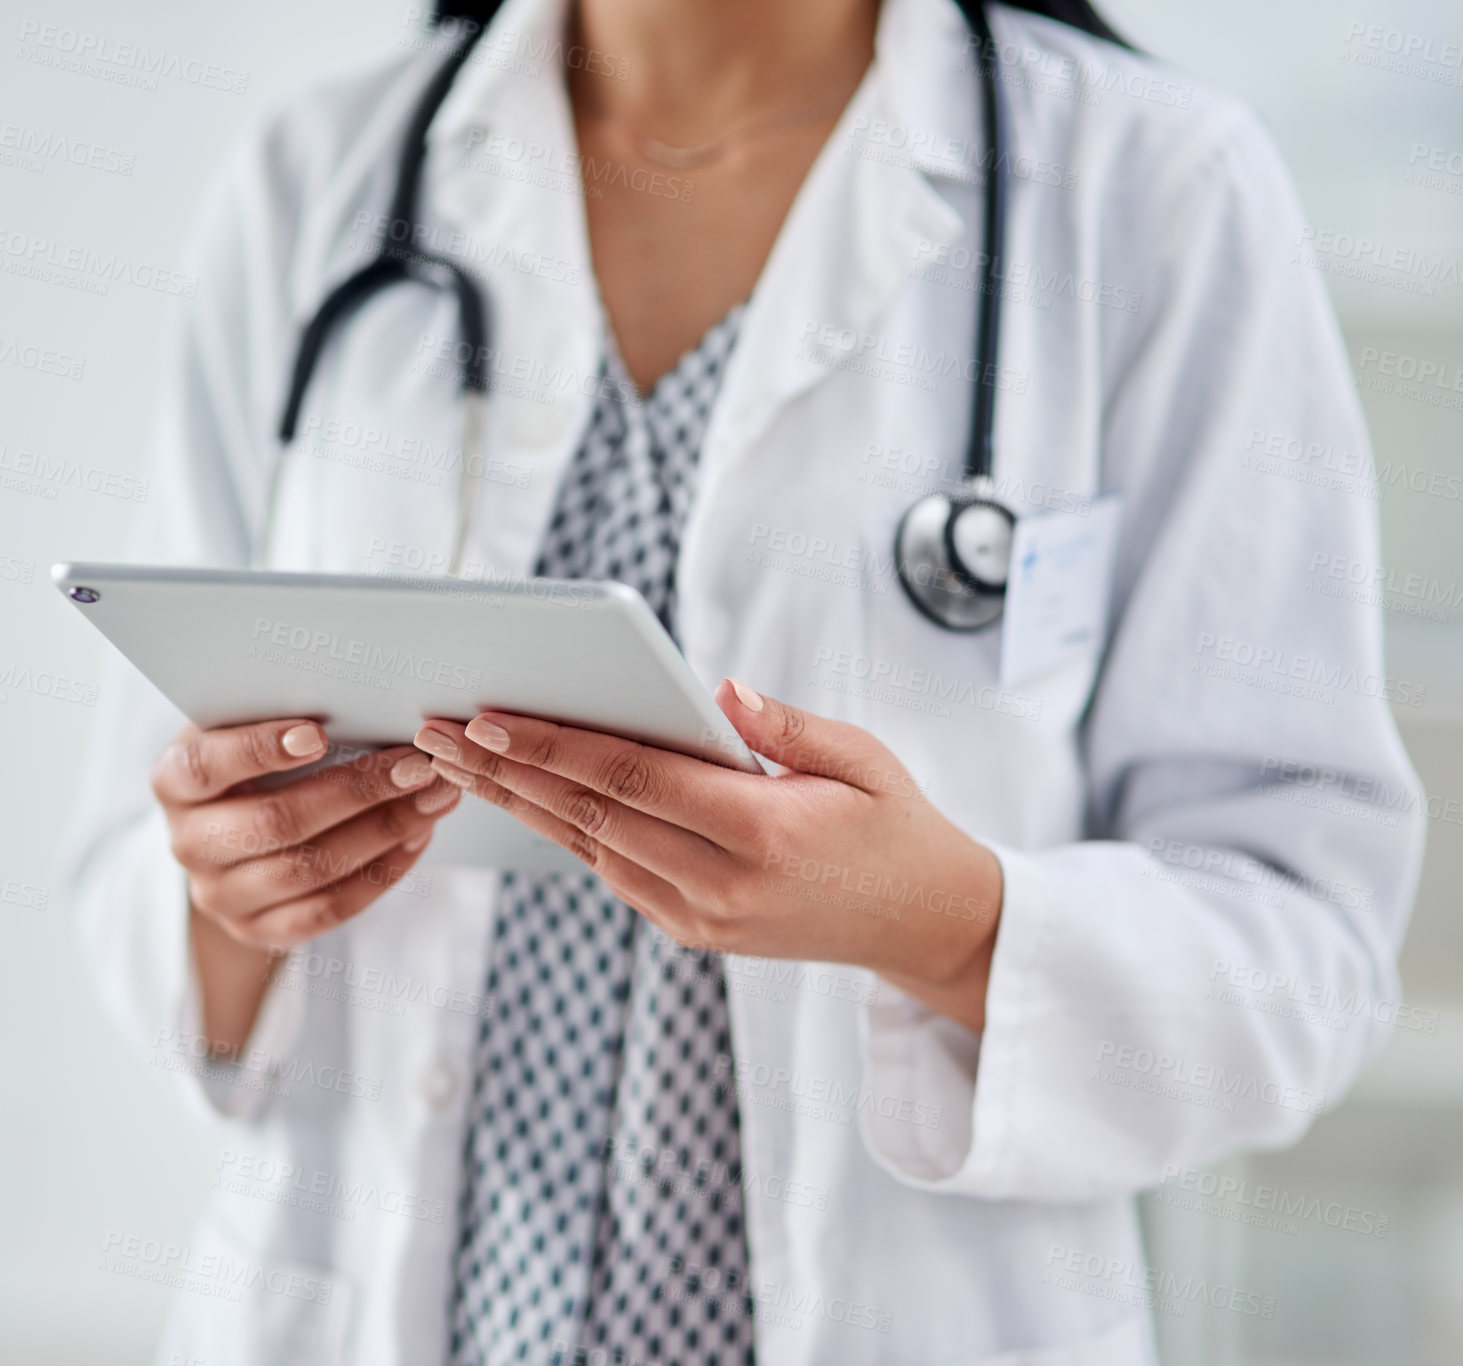 Buy stock photo Cropped shot of an unrecognizable doctor using a digital tablet while working in a clinic